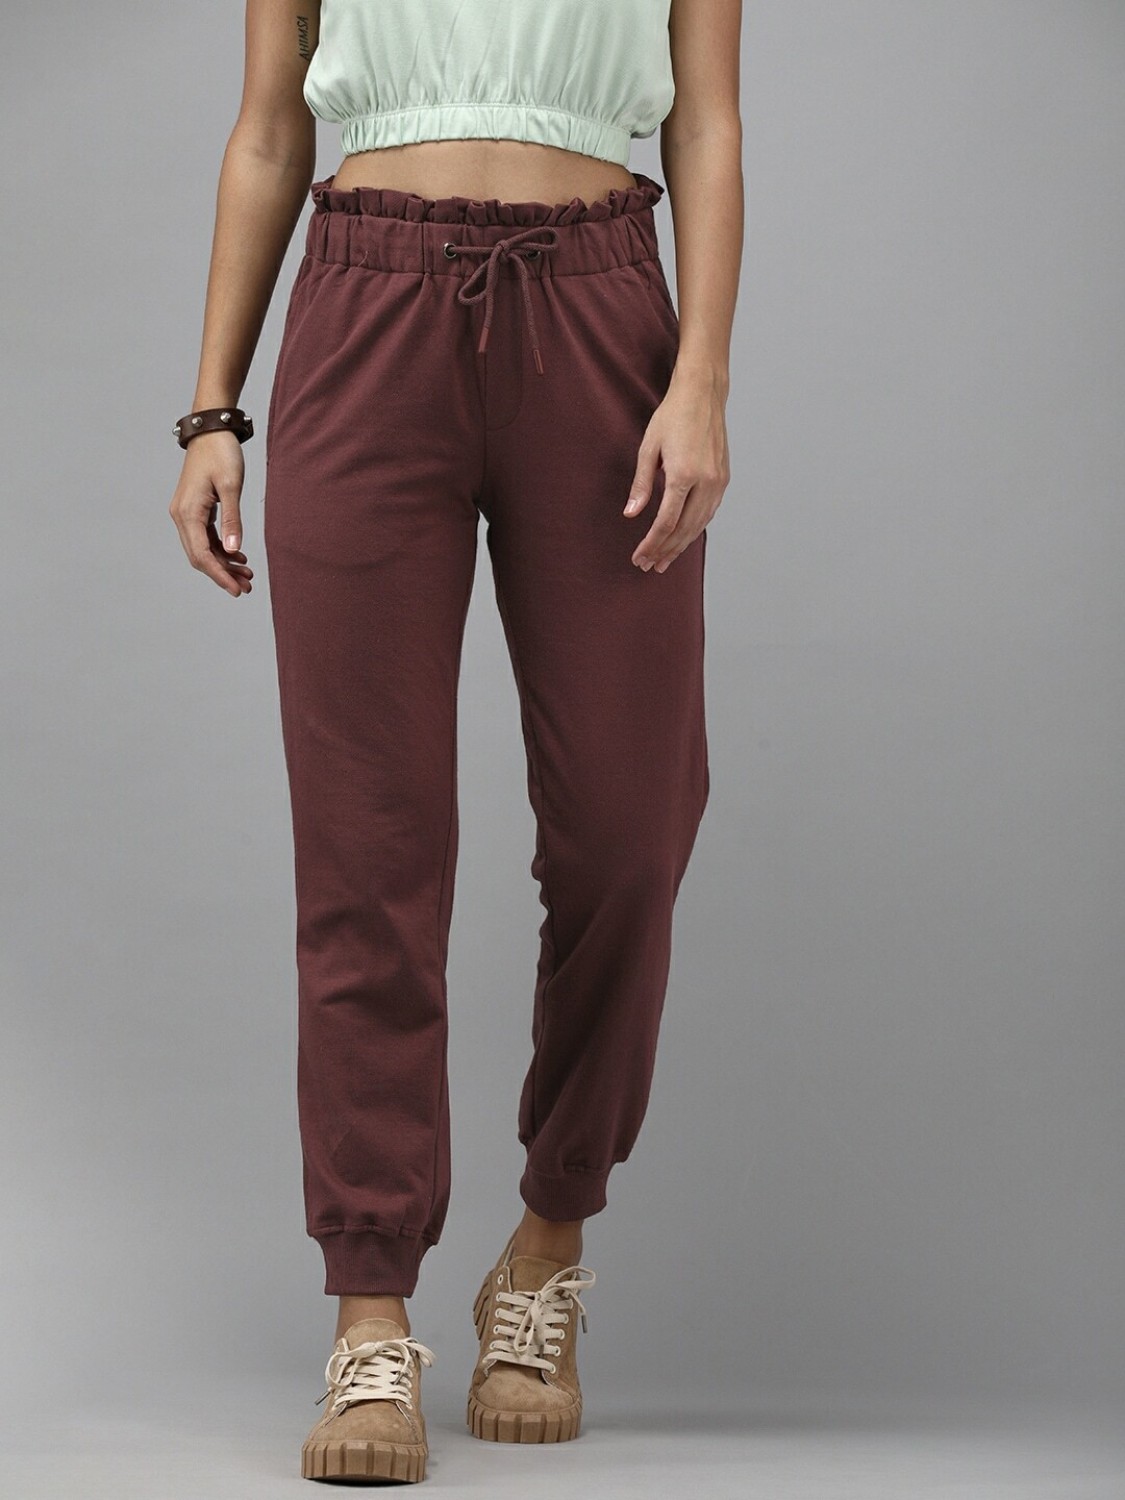 Striped Women Maroon Track Pants Price in India  Buy Striped Women Maroon  Track Pants online at Shopsyin